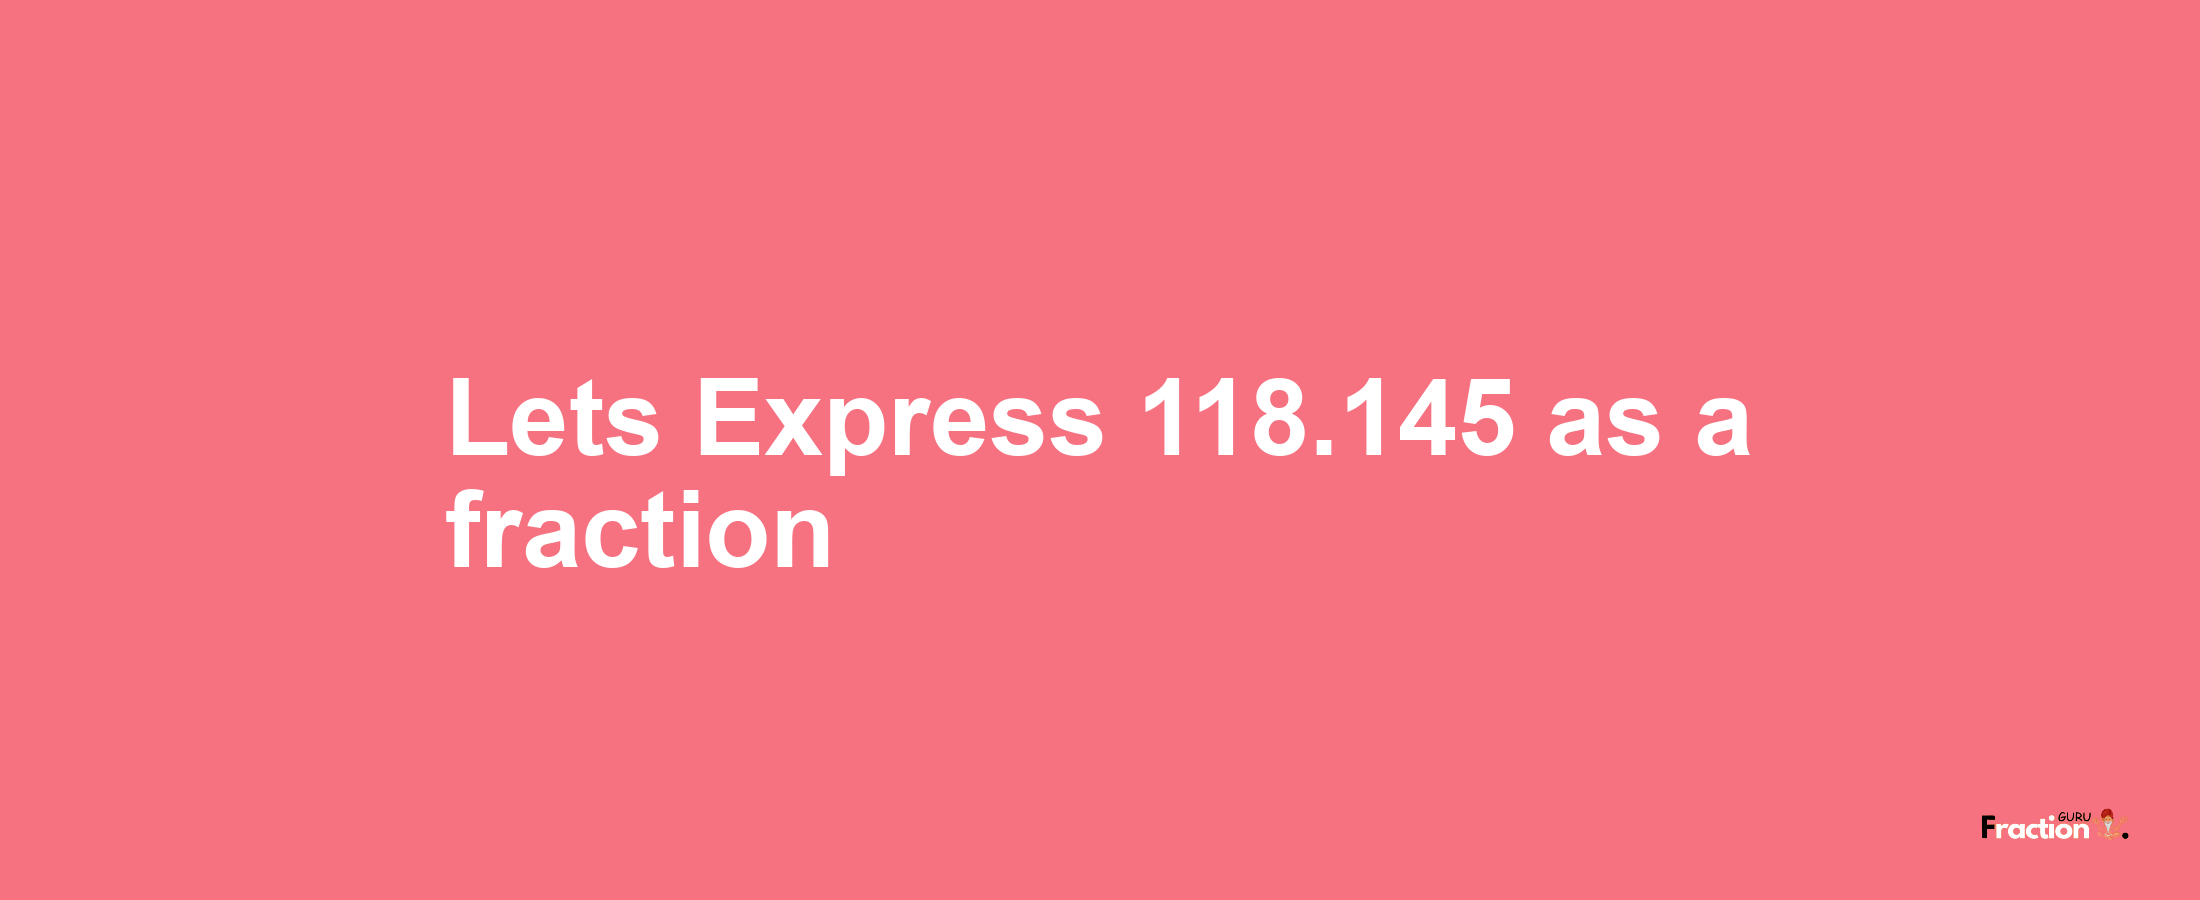 Lets Express 118.145 as afraction